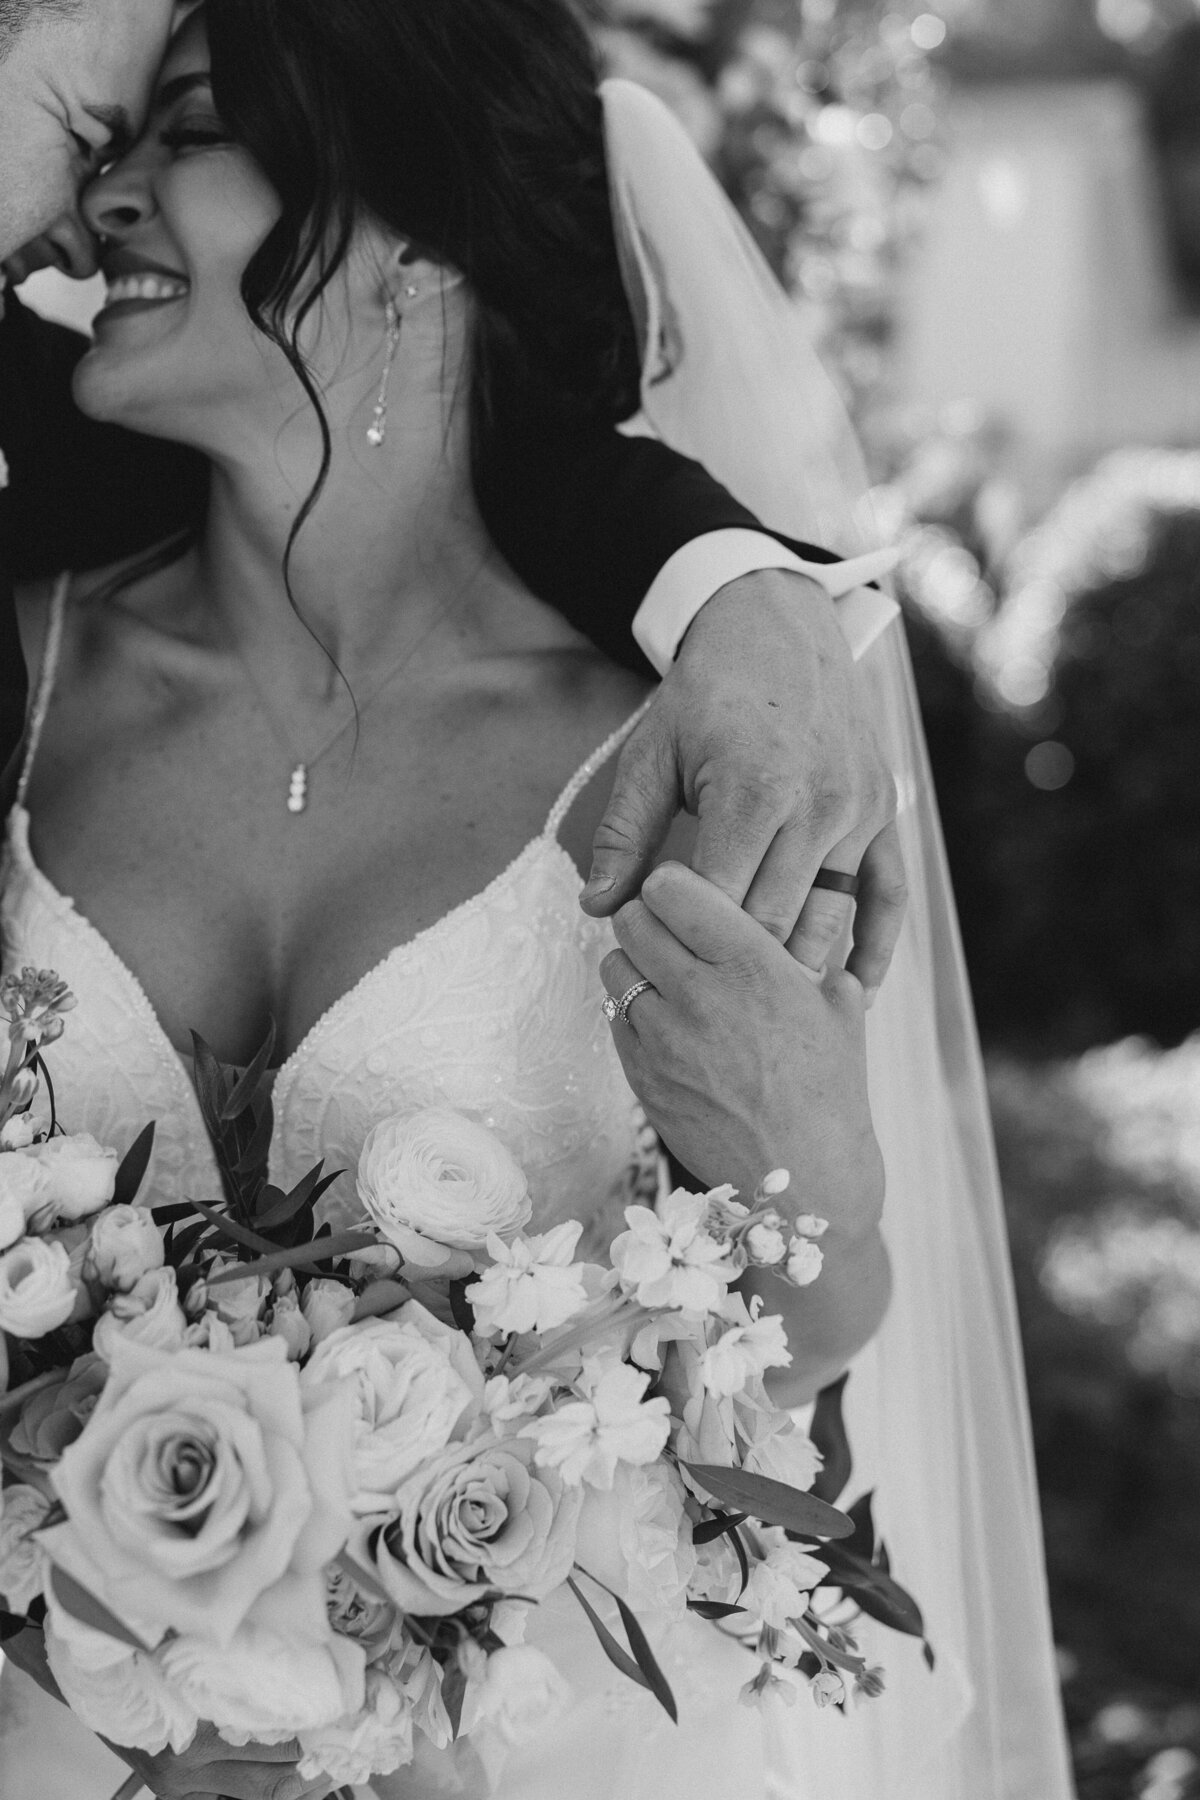 A bride and groom holding hands next to a bouquet